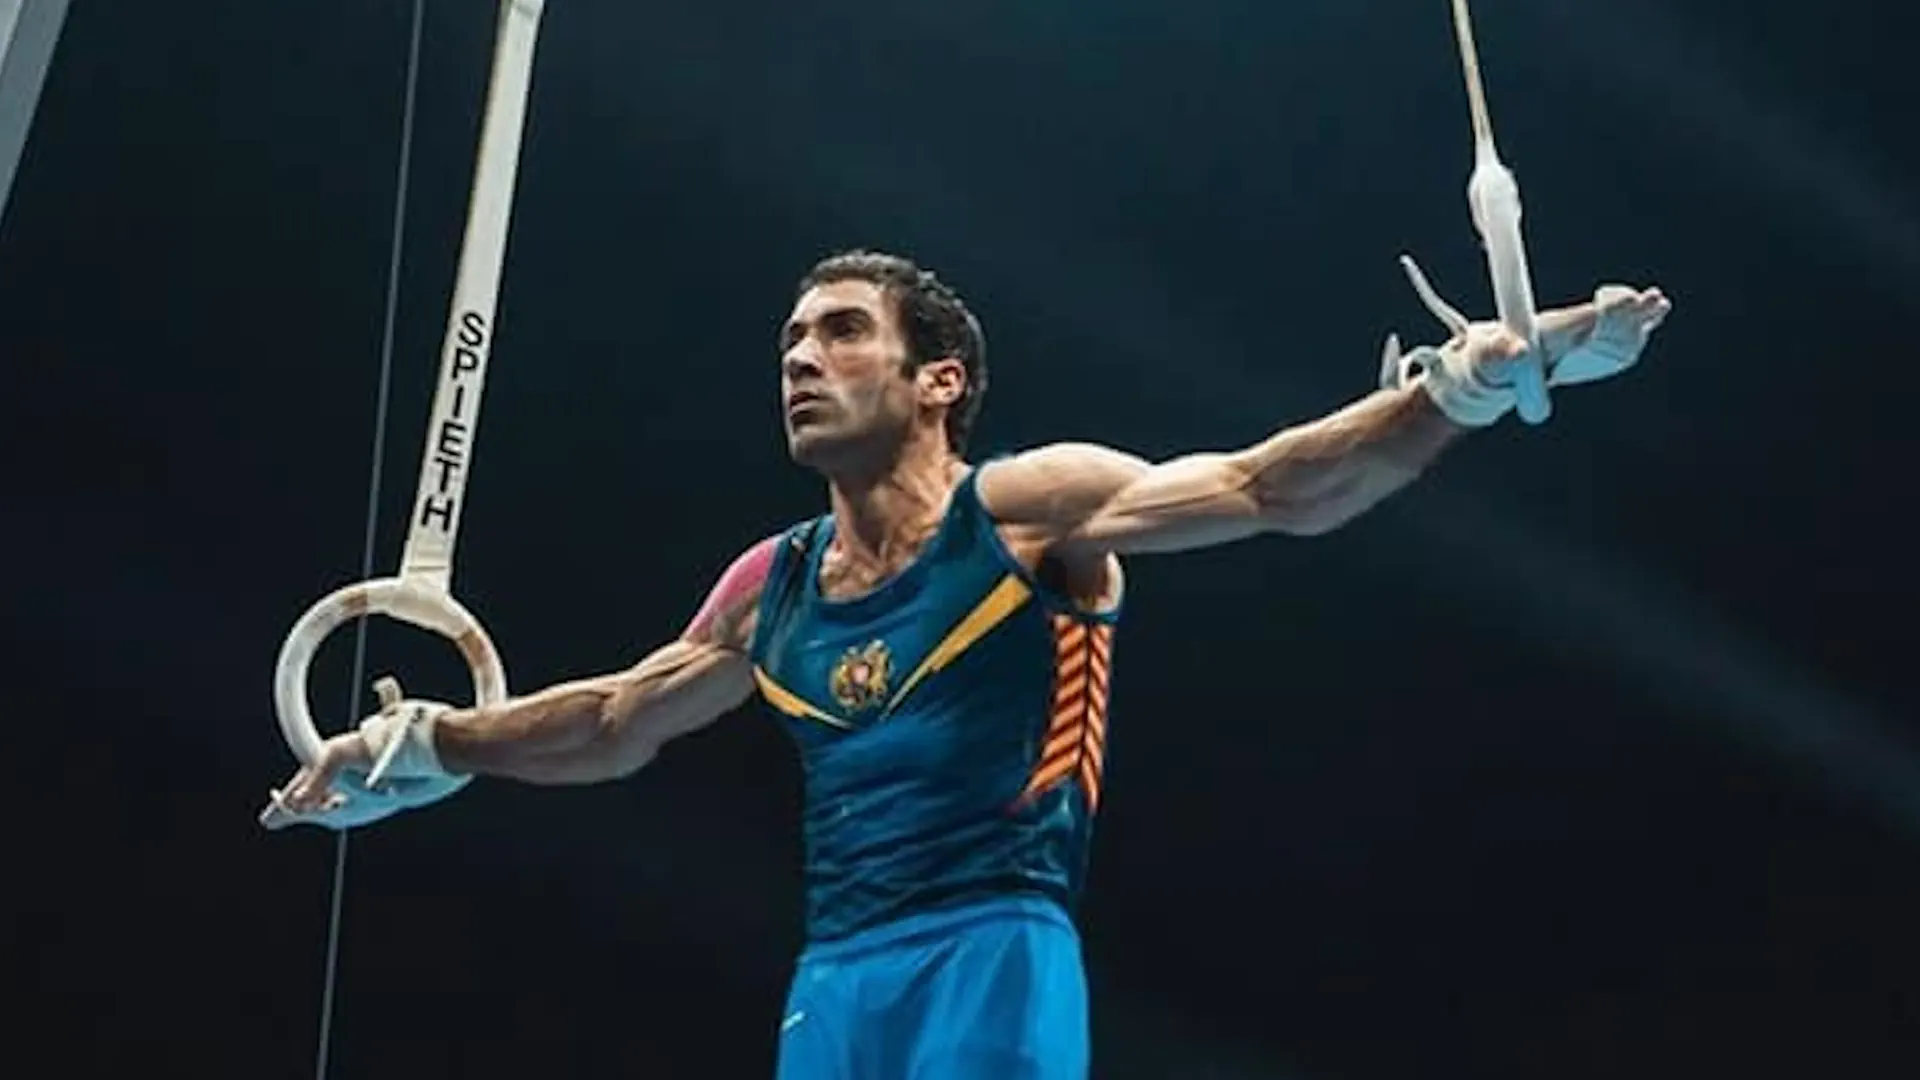 Vahagn Davtyan reached the Olympic dream at the age of 35